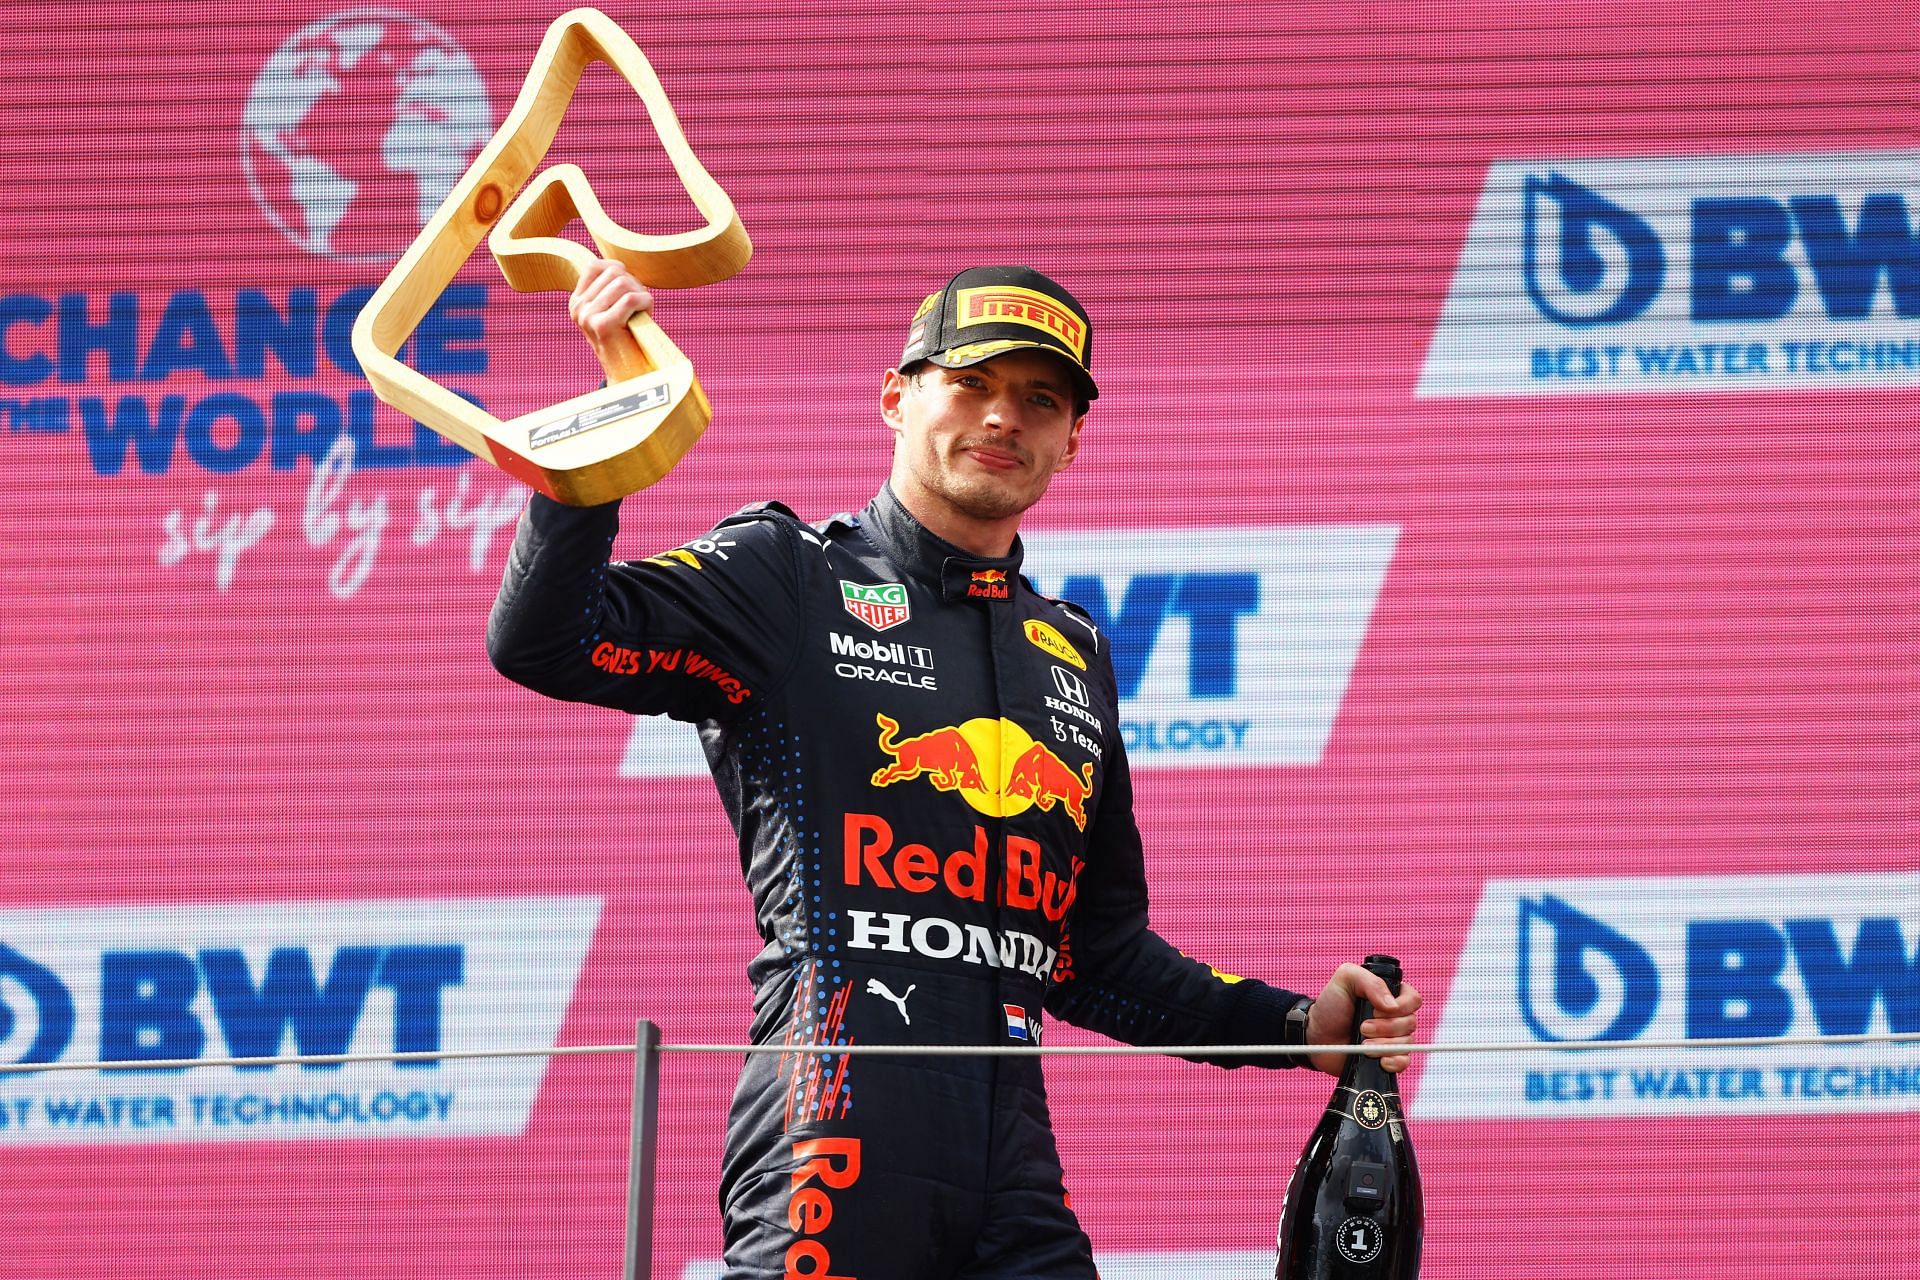 Max Verstappen became the youngest Grand Chelem winner in F1 history a the 2021 Austrian Grand Prix